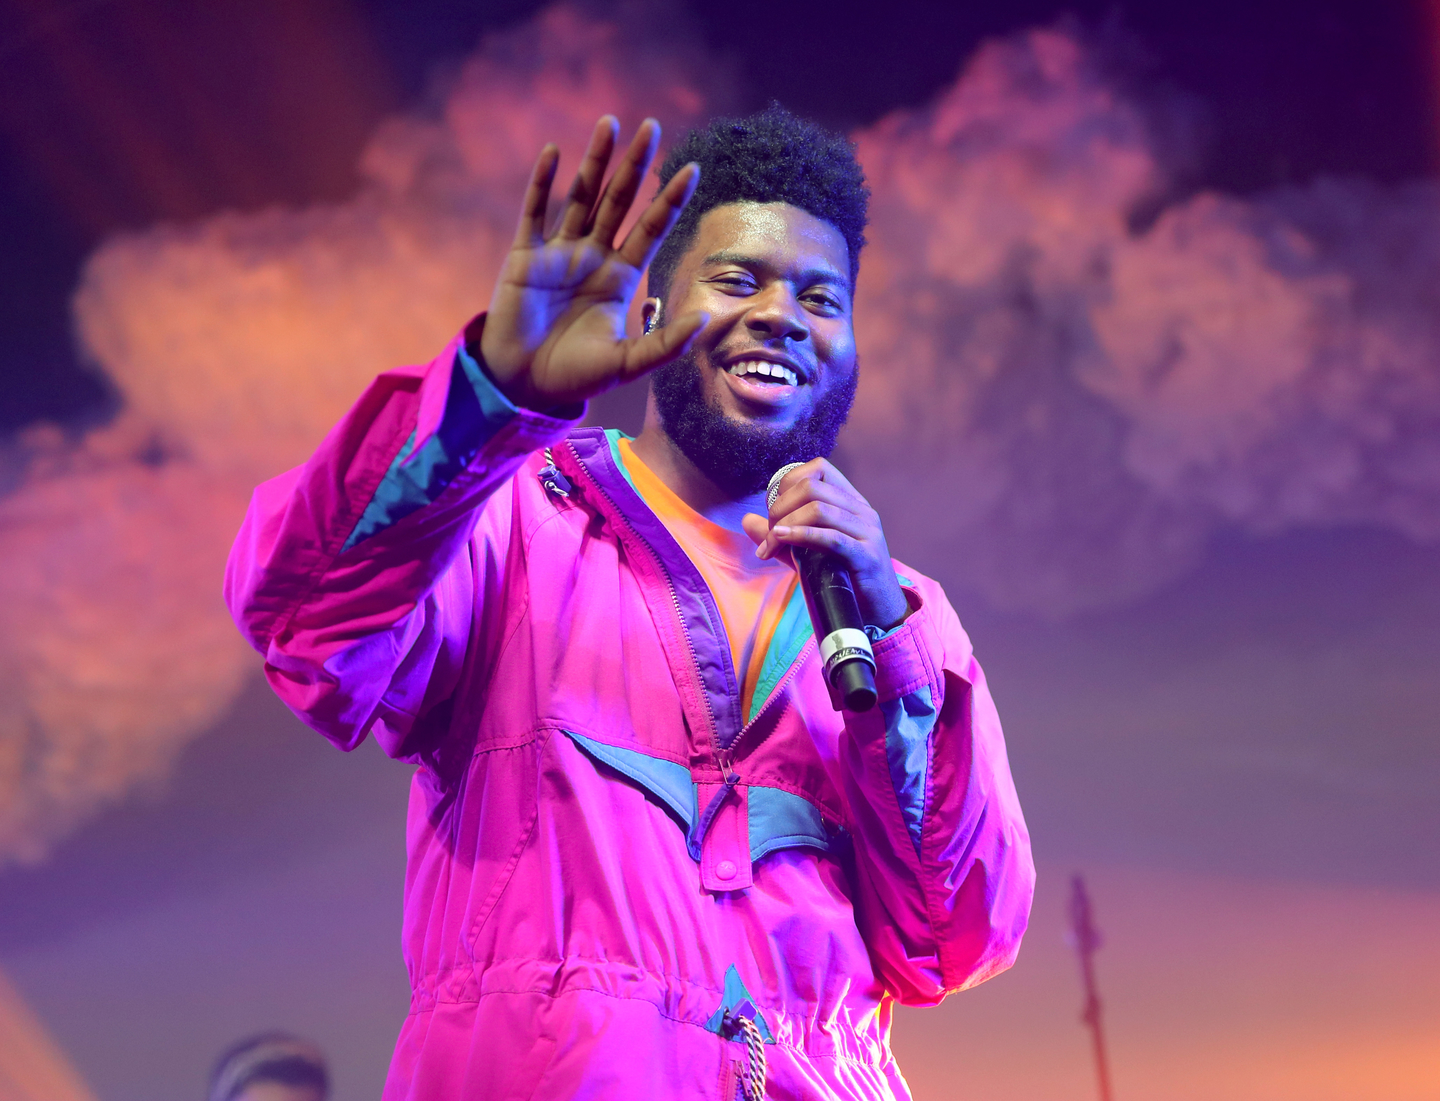 Khalid at Sony’s #LostInMusic showcase at Trinity Warehouse. Photo by Hutton Supancic/Getty Images for SXSW